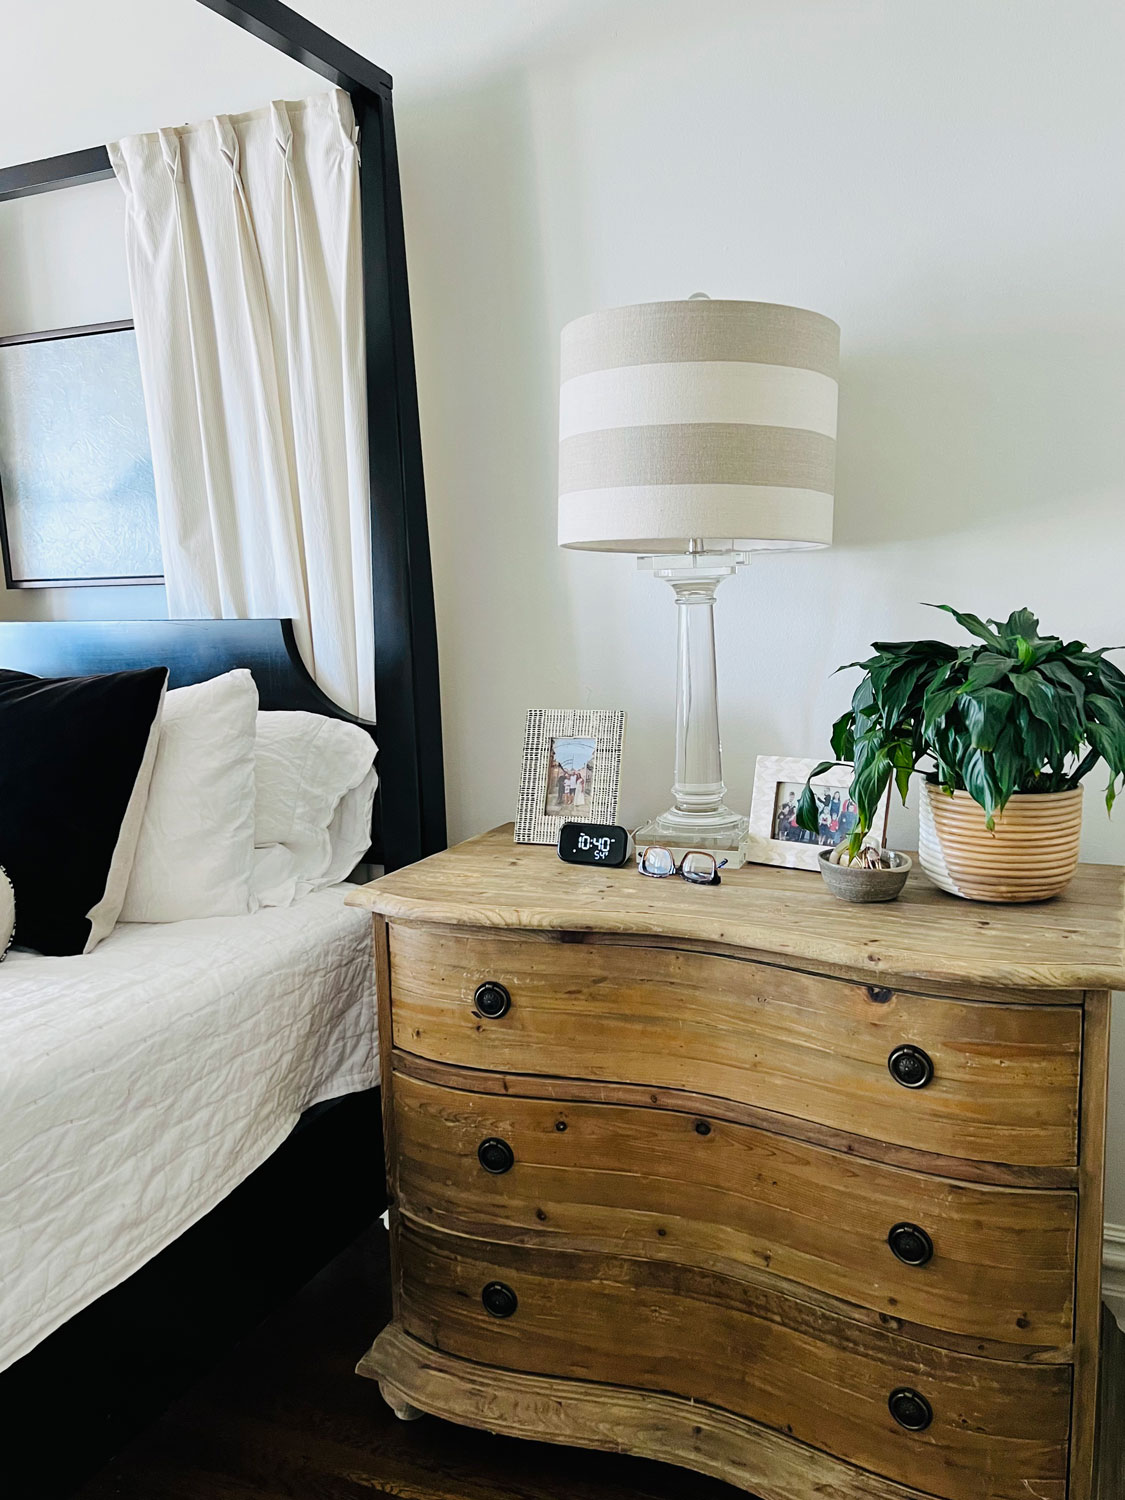 bedside chest with striped lamp shade and clock